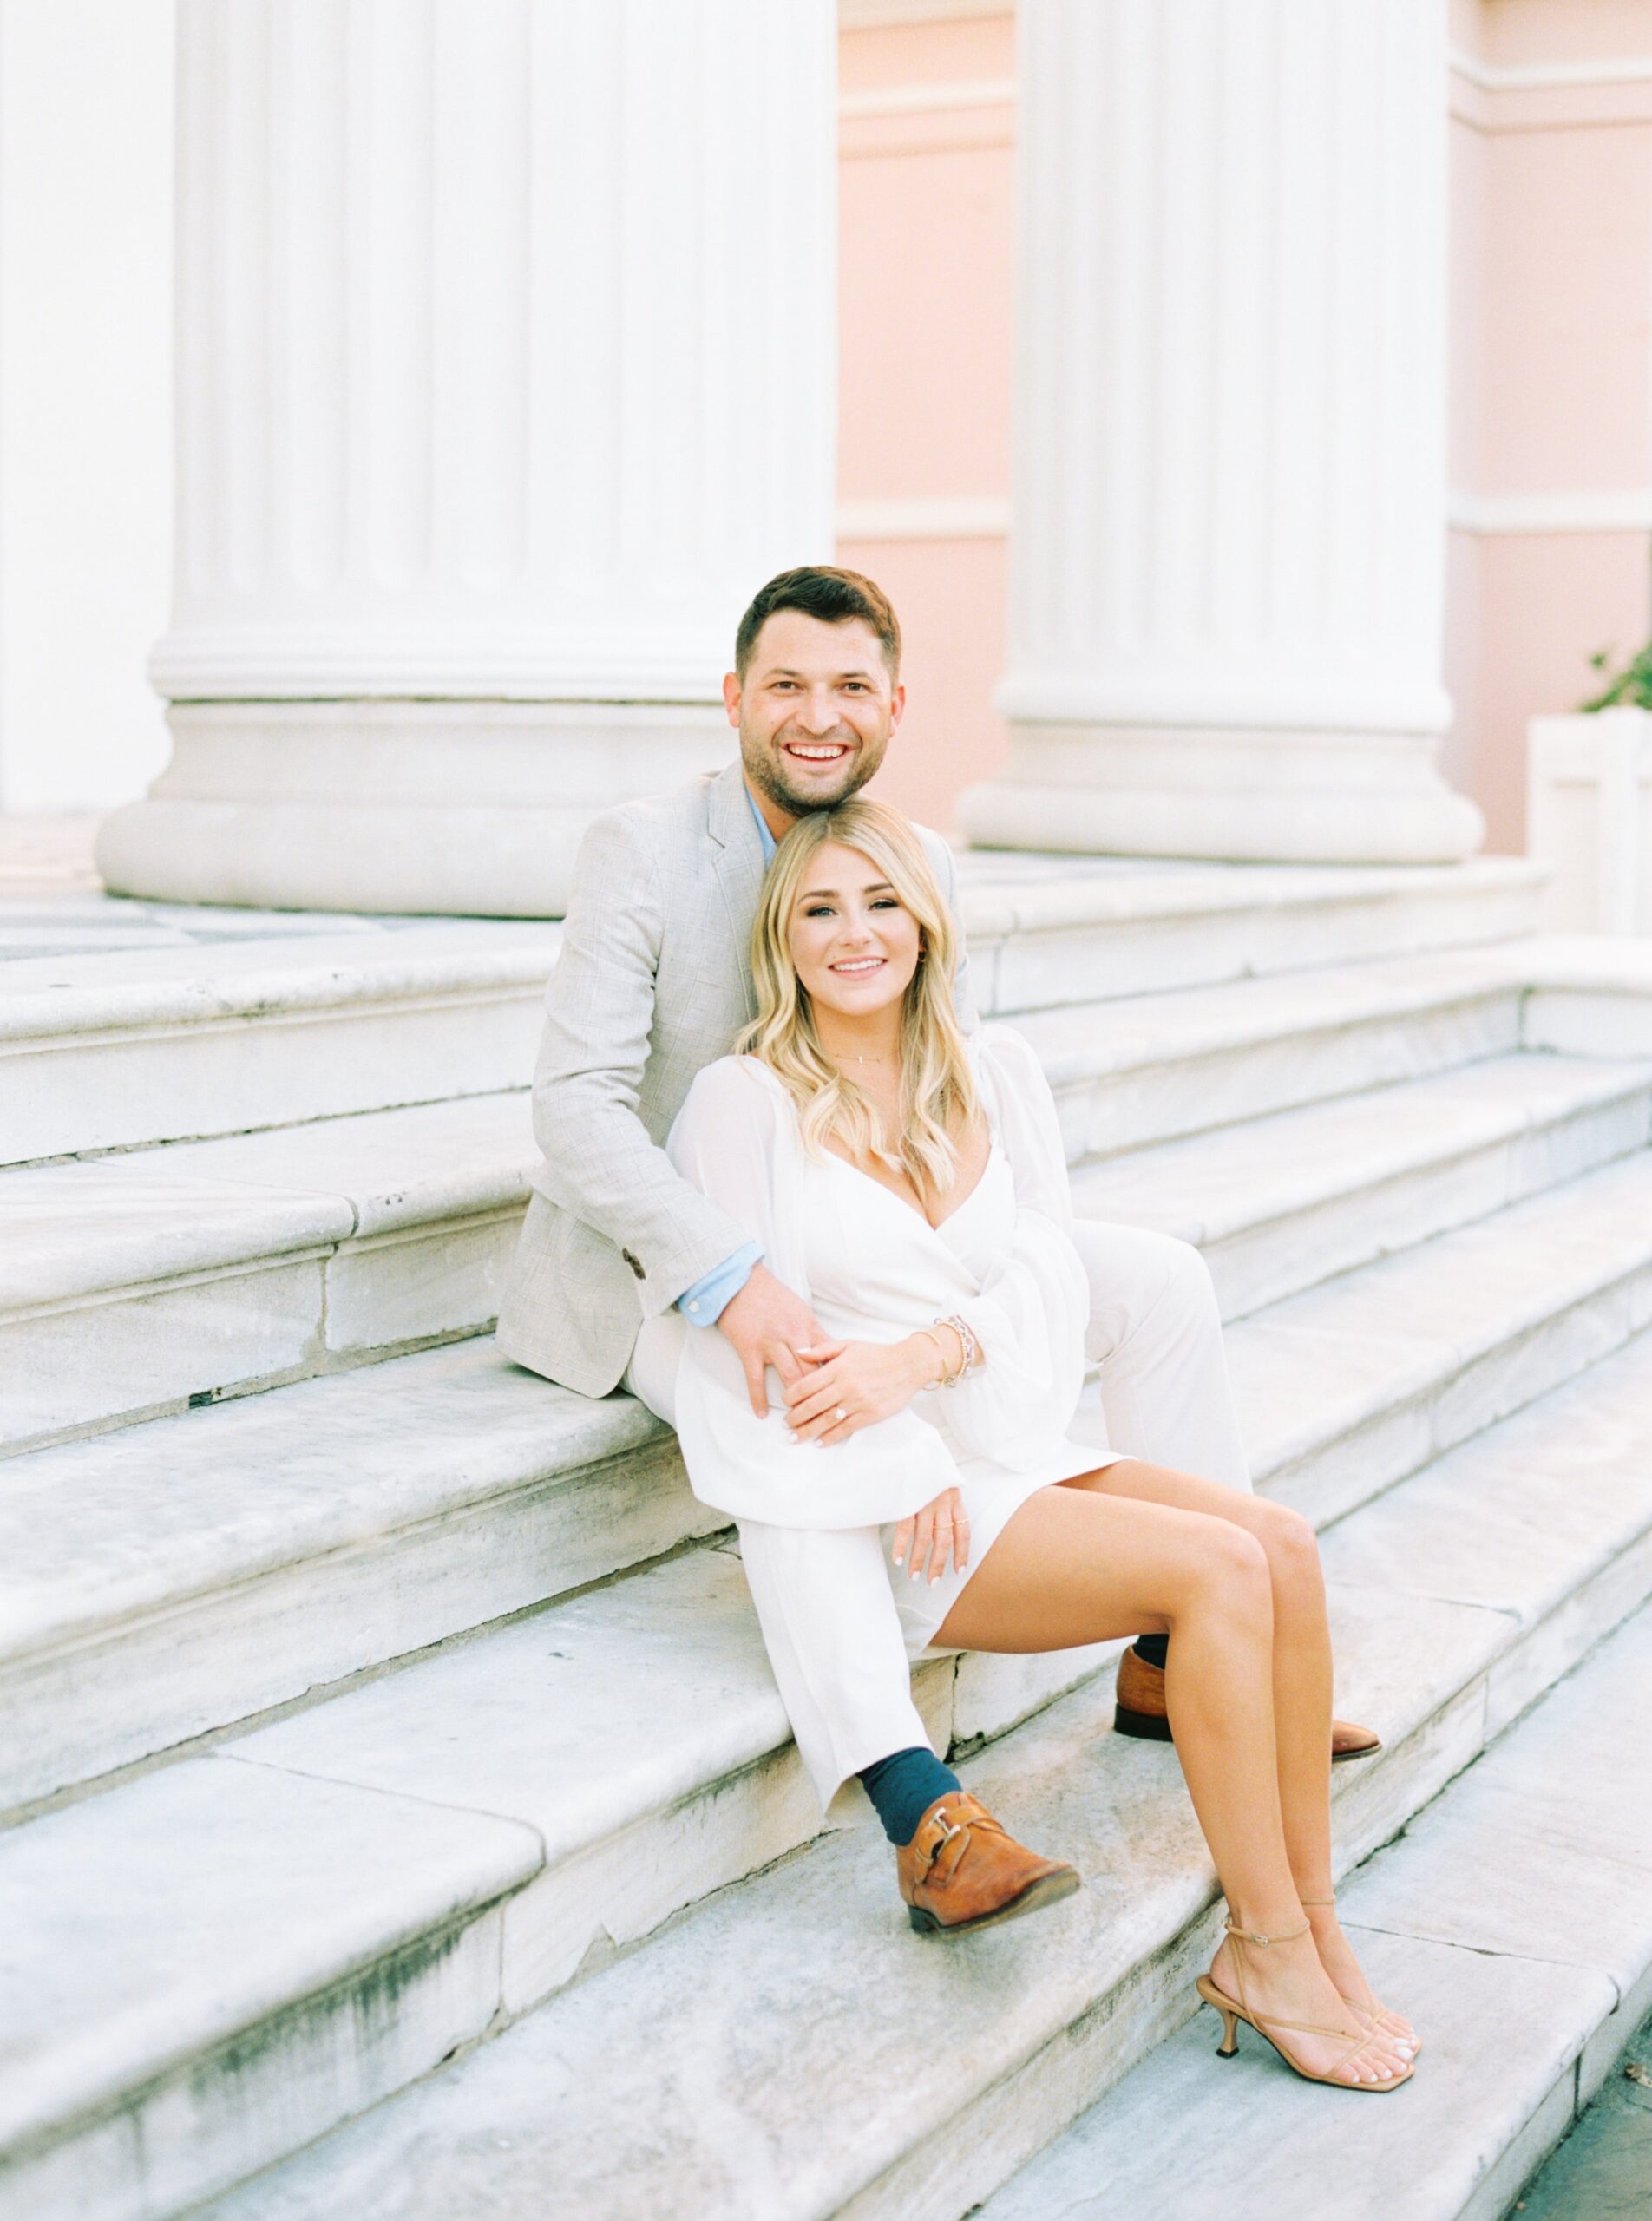 man and woman engagement on marble steps with white columns